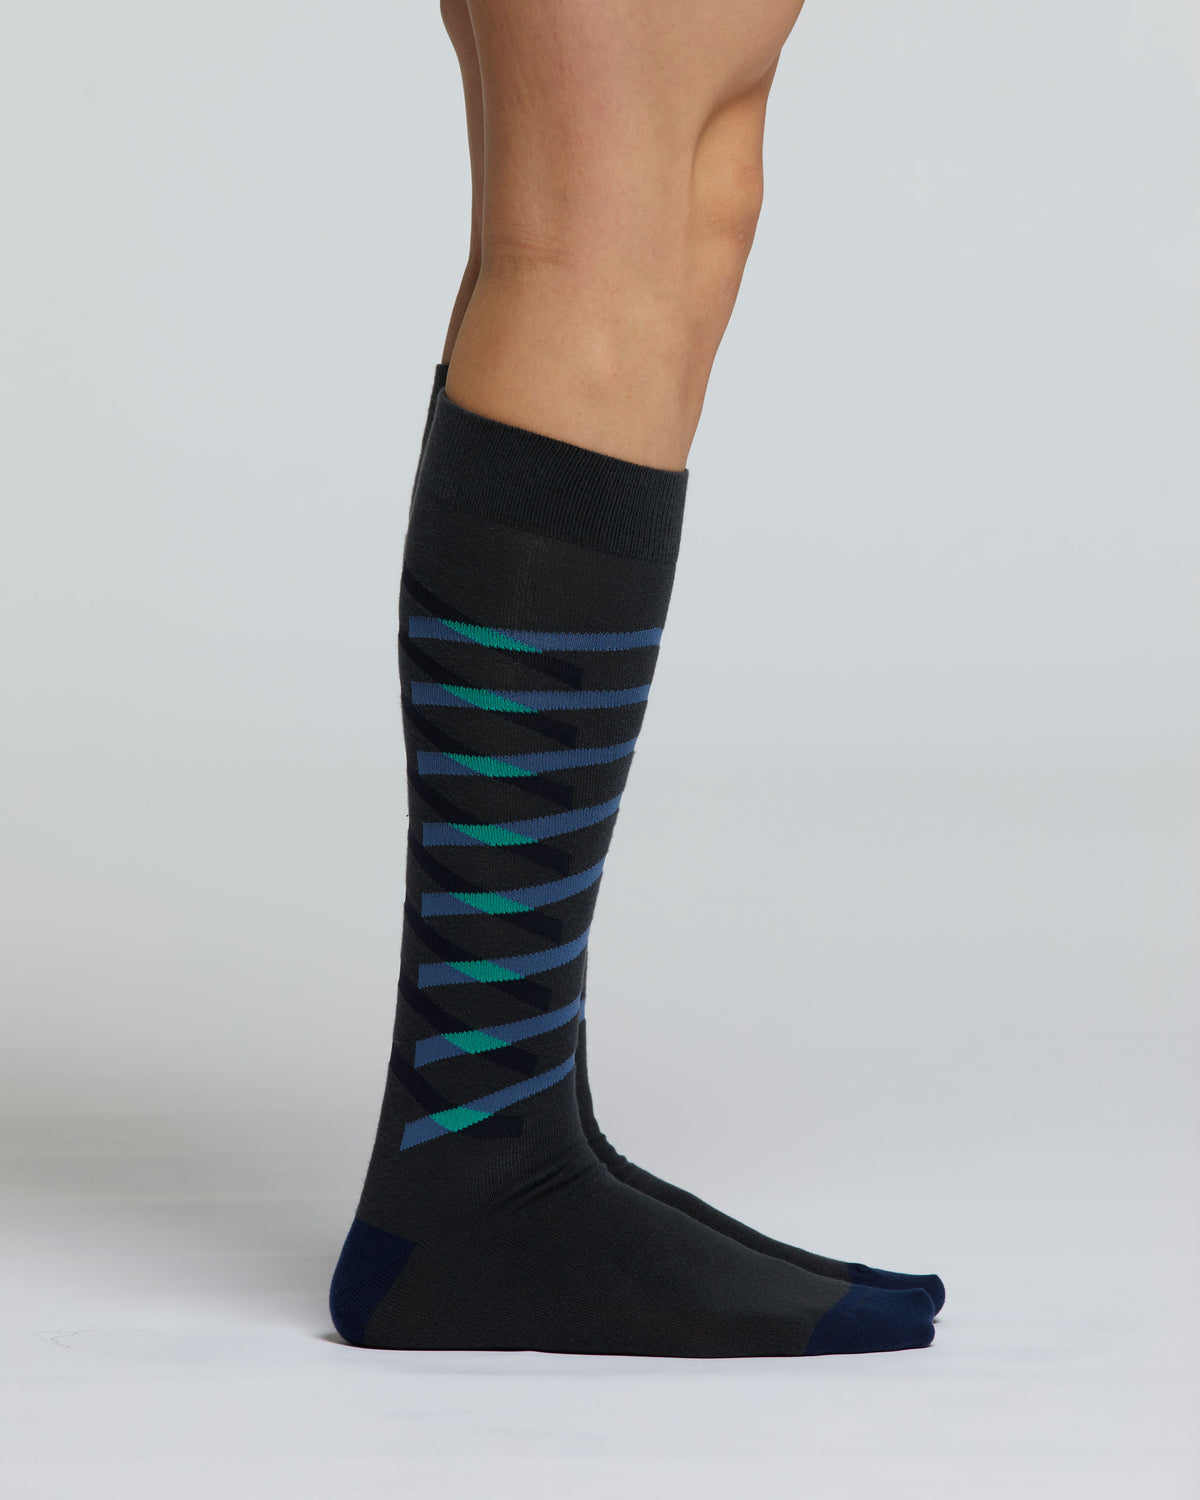 LONG COTTON ROVERE SOCK WITH ENTWINED-STRIPE PATTERN